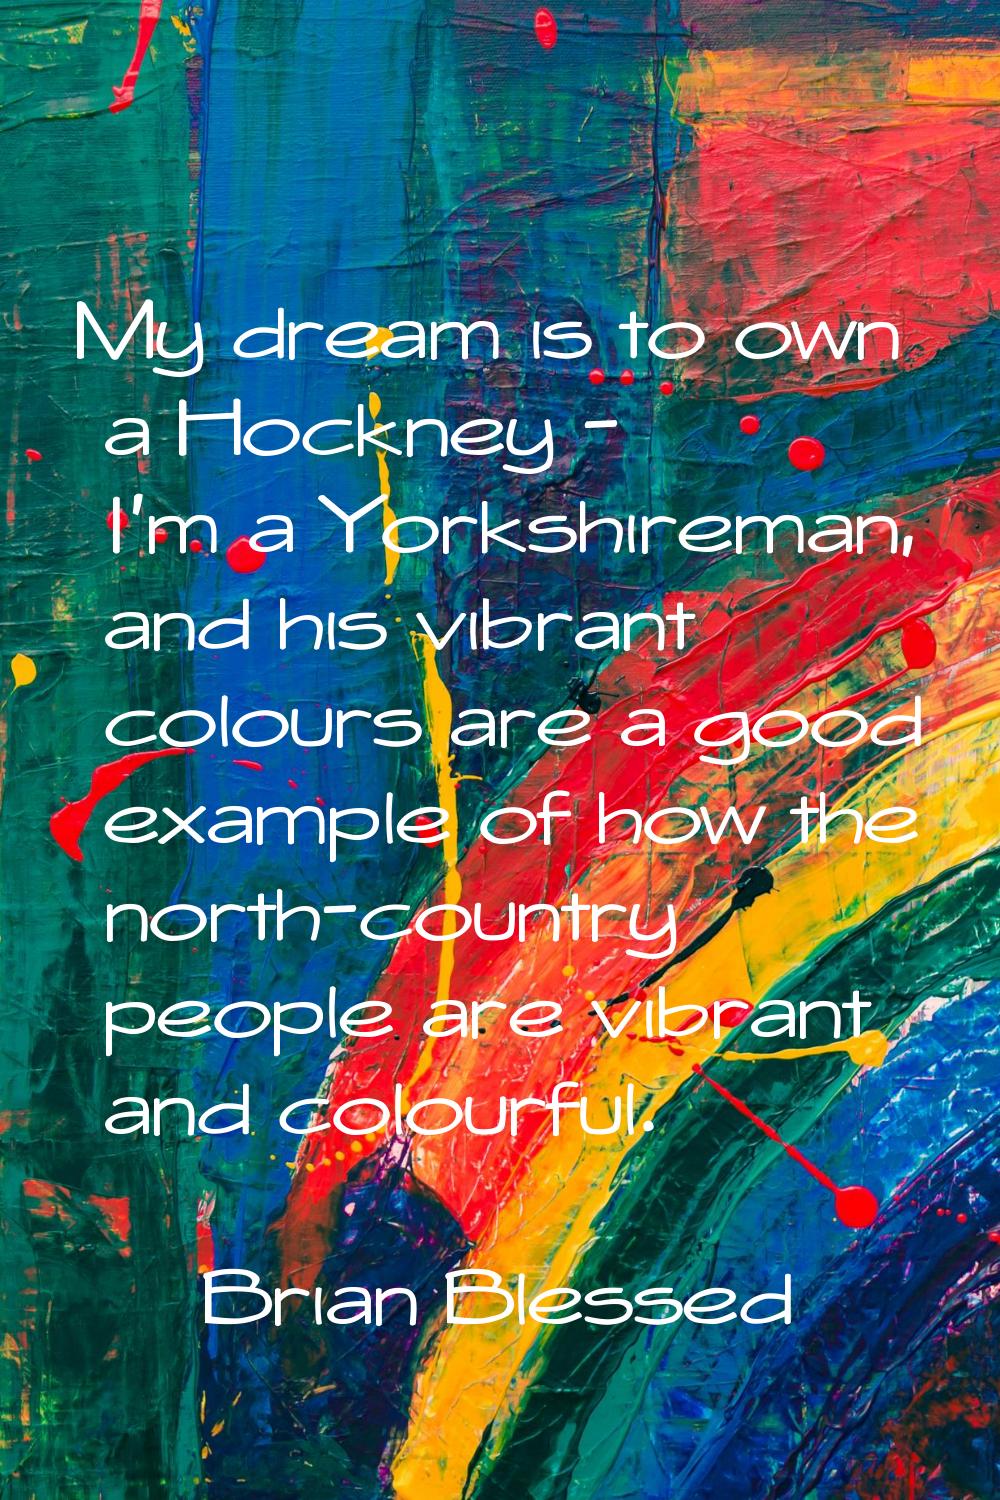 My dream is to own a Hockney - I'm a Yorkshireman, and his vibrant colours are a good example of ho